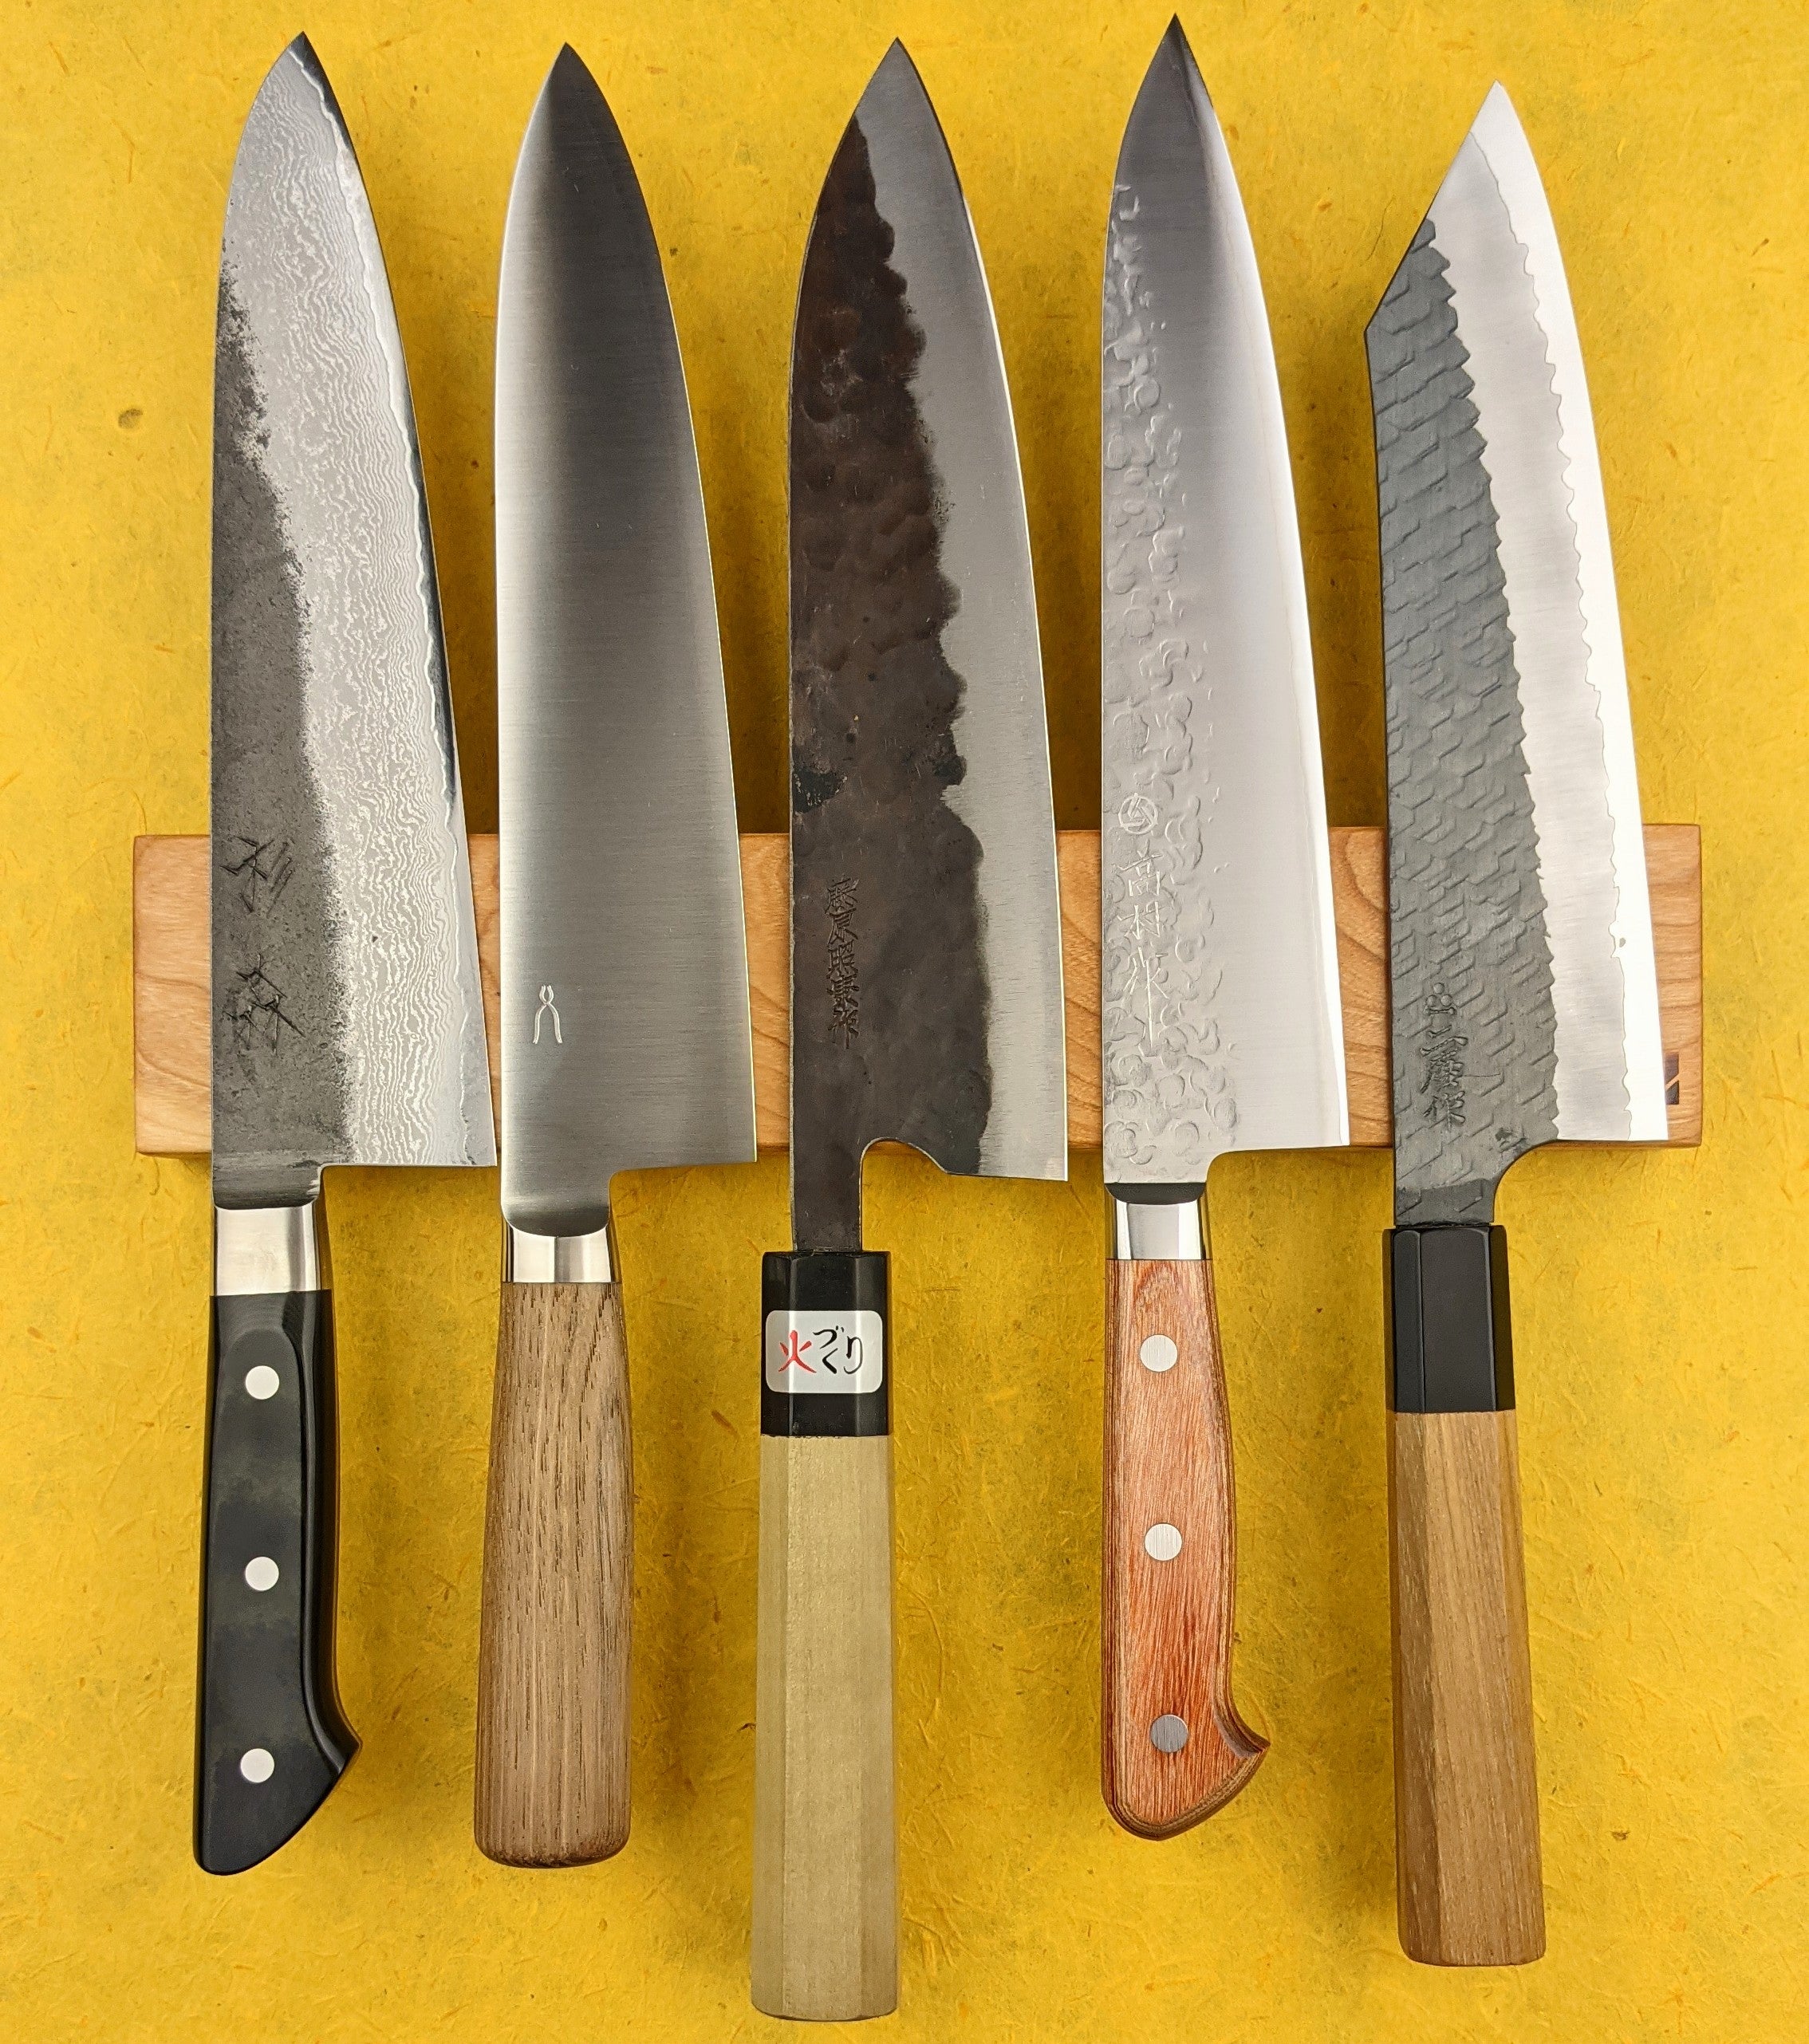 Kevin Kent's top 5 Chef Knives for Home Cooks